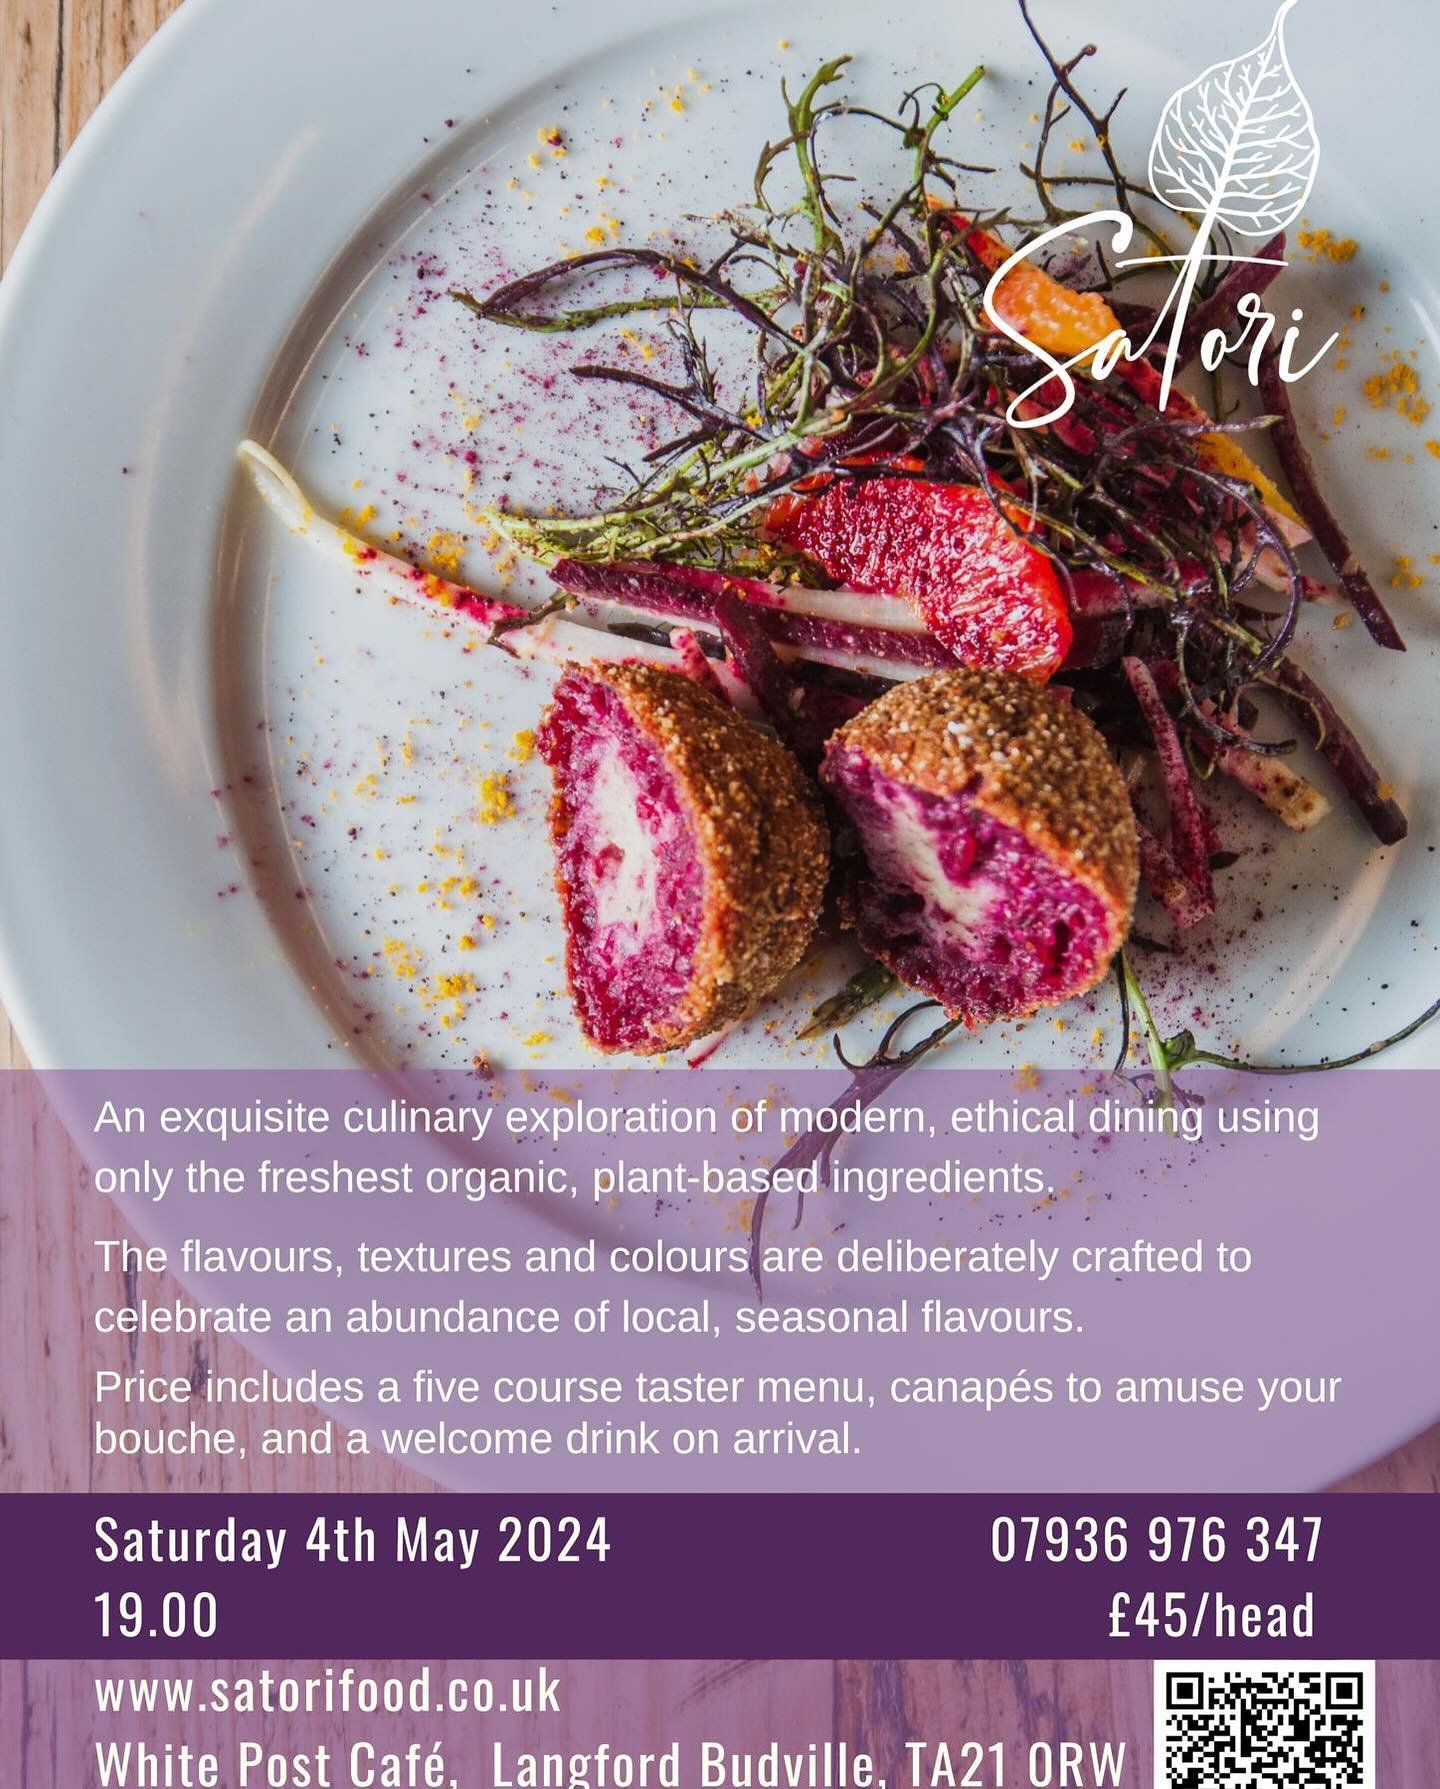 We are extremely excited to announce that we are partnering with the wonderful @satorifooduk to bring you an evening of culinary magic on the edge of the Black Down Hills.

Satori @ White Post Caf&eacute;

Saturday May 4th 2024, 19:00

Langford Budvi